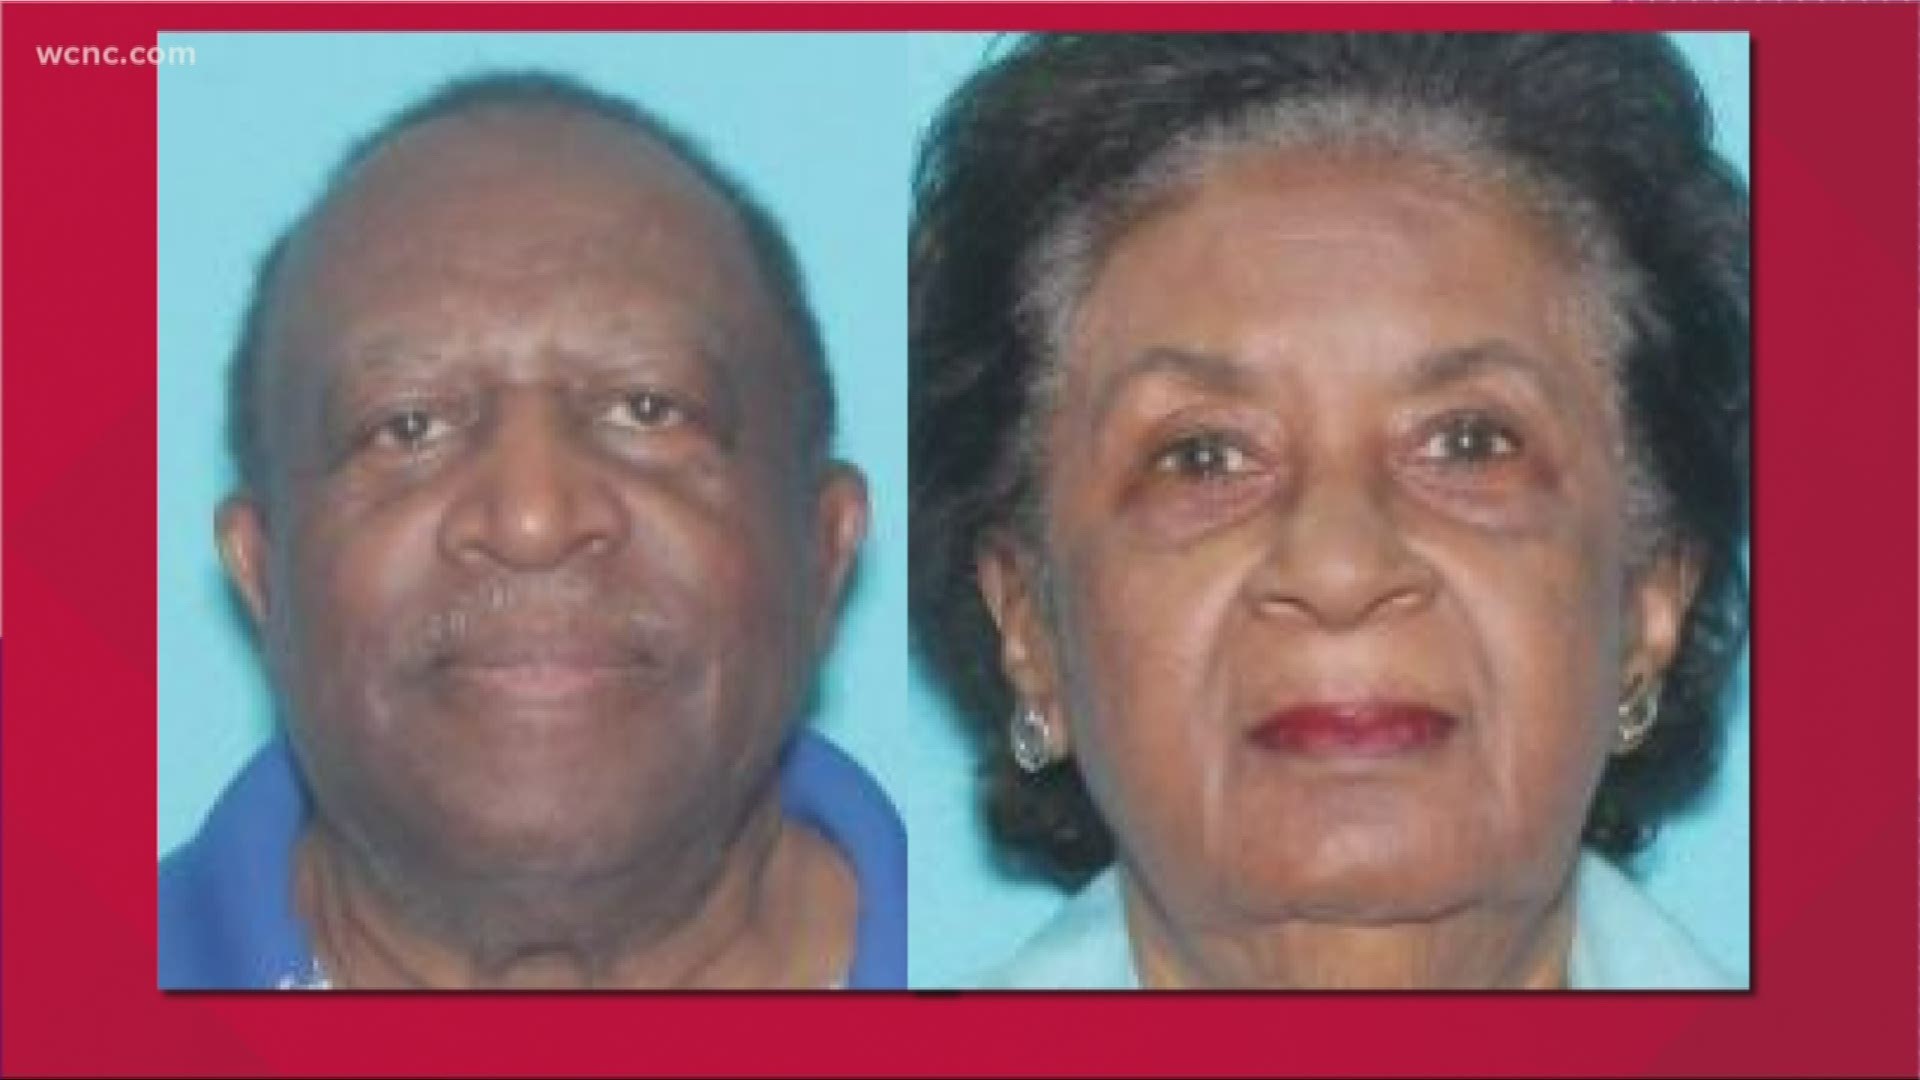 Charles Whitener and Maxine Whitener were last seen on Beth Haven Church Road in Denver.